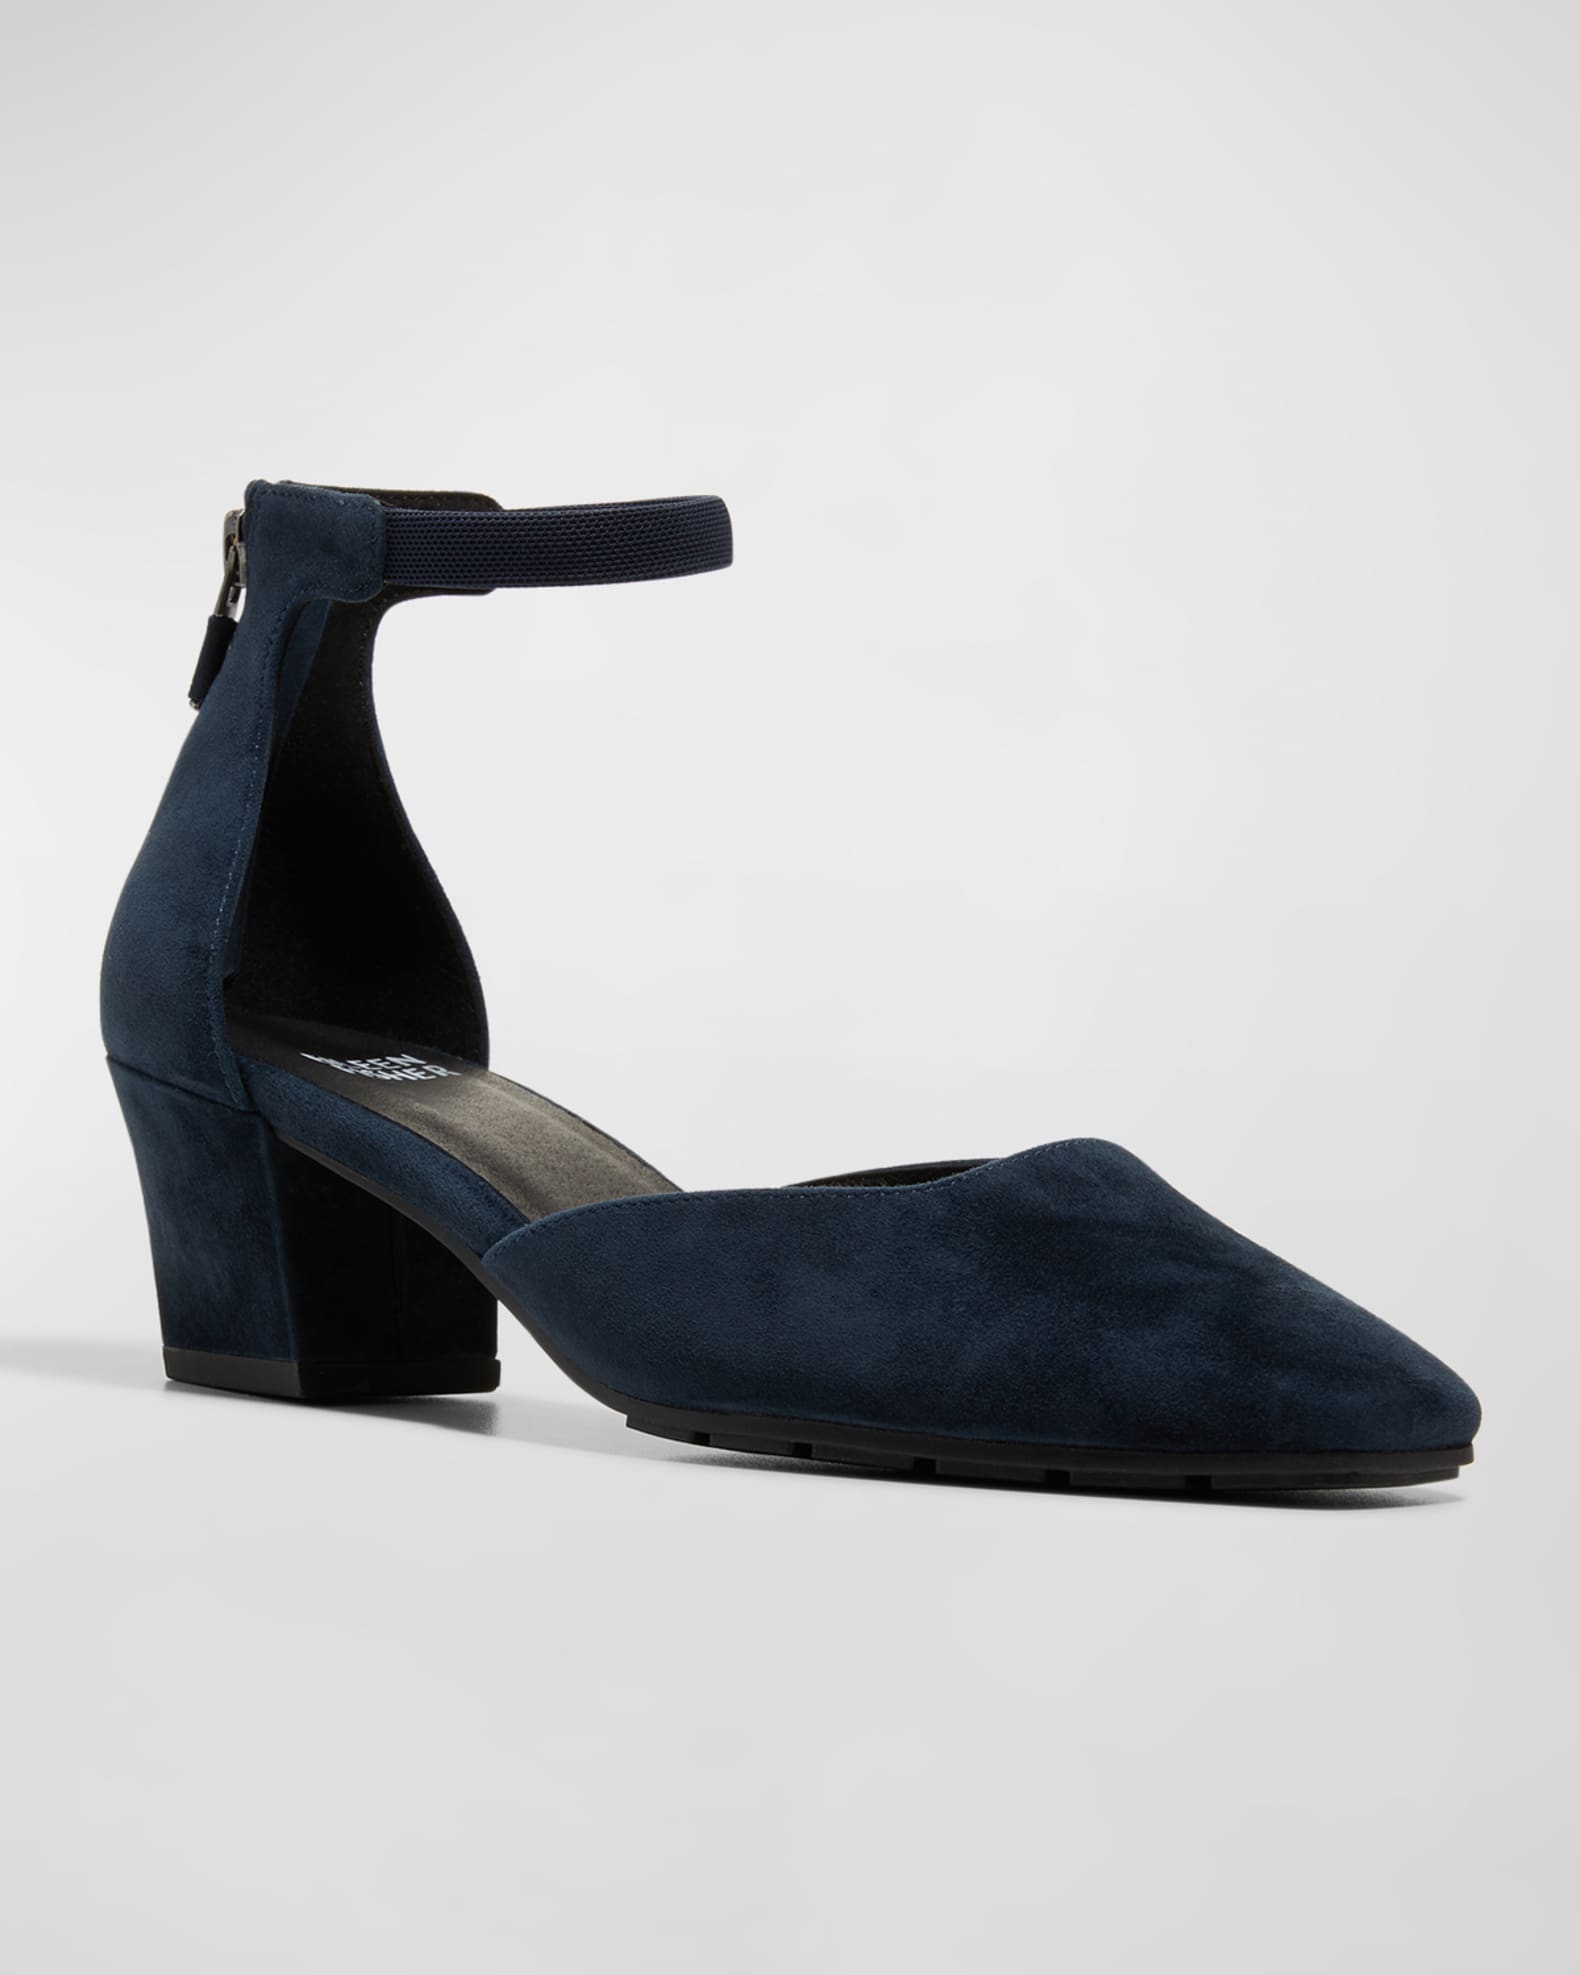 Eileen Fisher Veery Suede Ankle-Cuff Pumps | Neiman Marcus